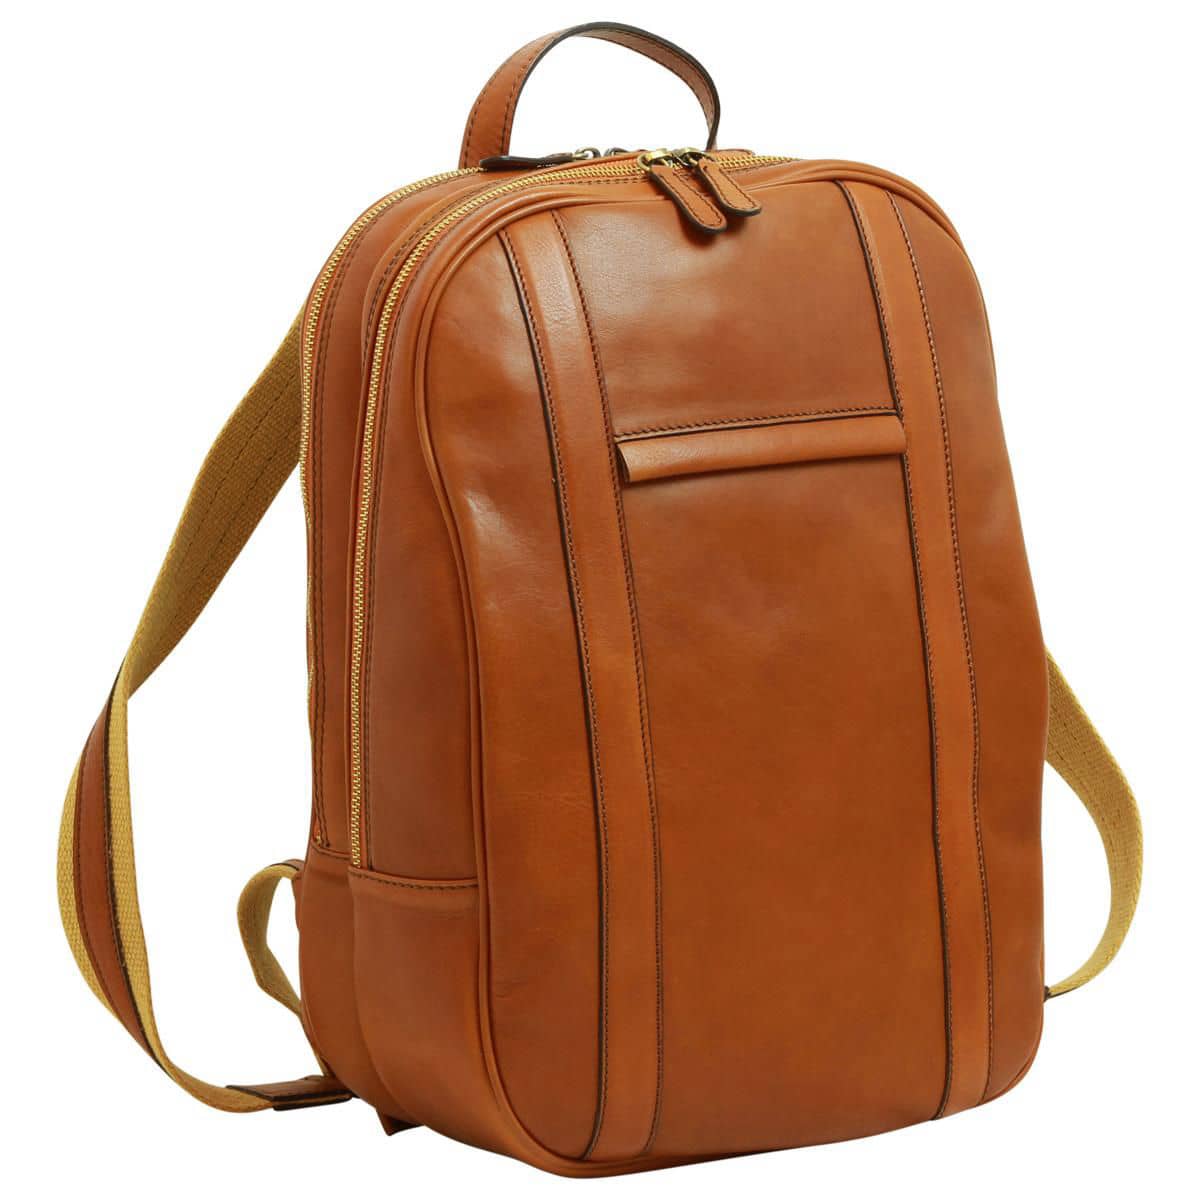 Wholesale Leather Bags Italy - Leather Bags And Accessories